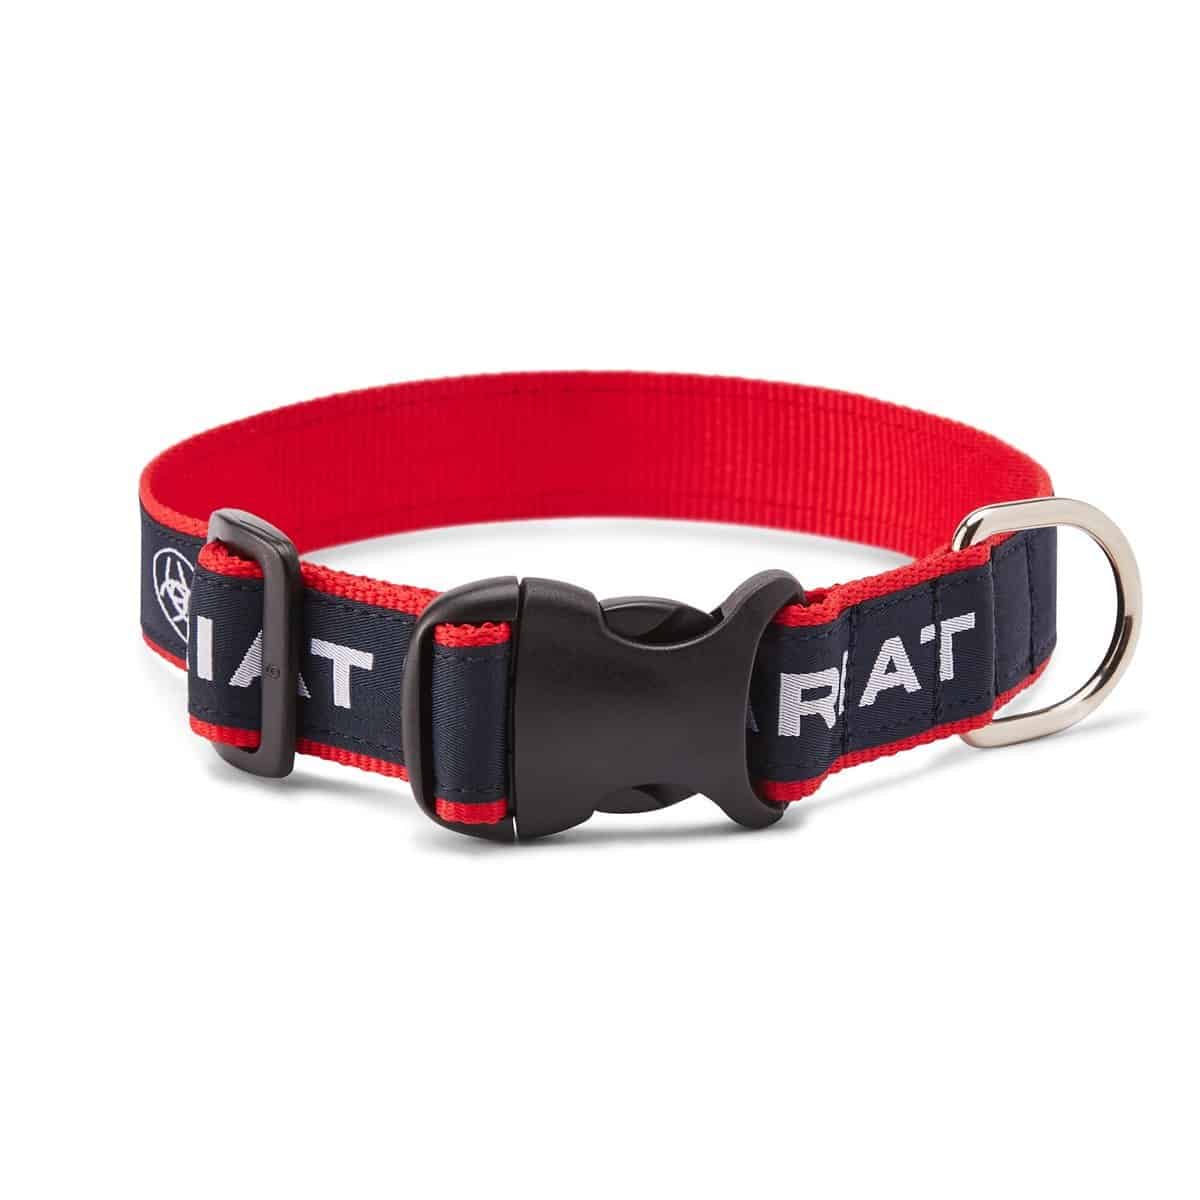 Ariat Dog Collar - Team Navy Dog Collars and Leads 